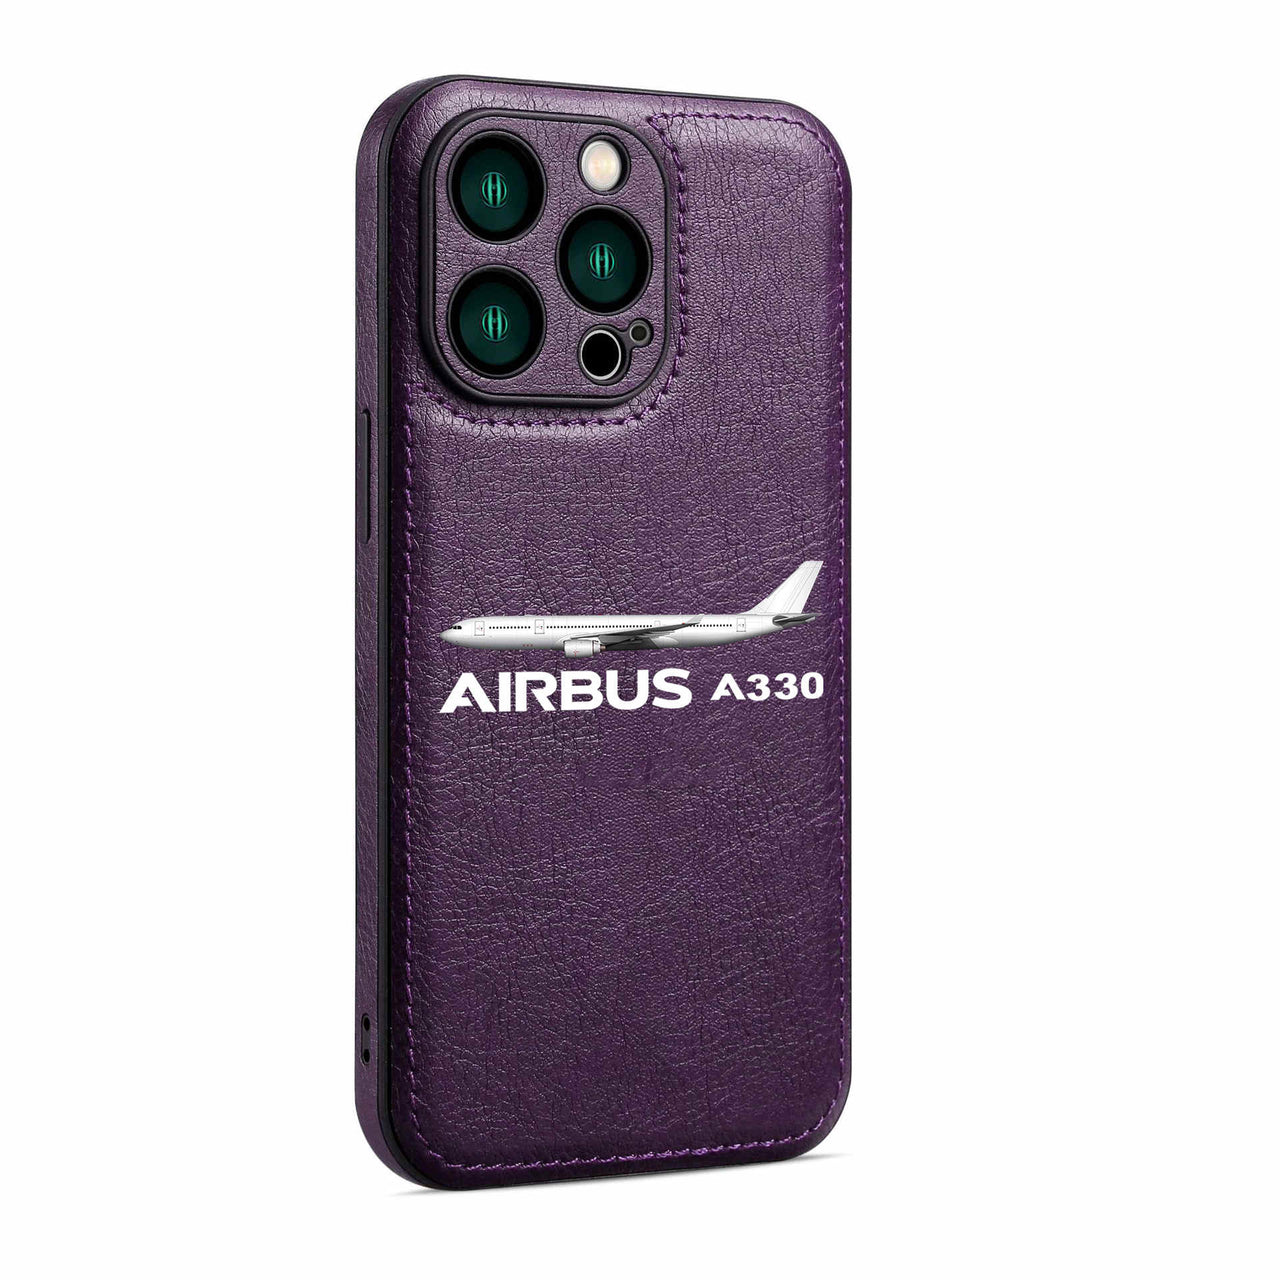 The Airbus A330 Designed Leather iPhone Cases